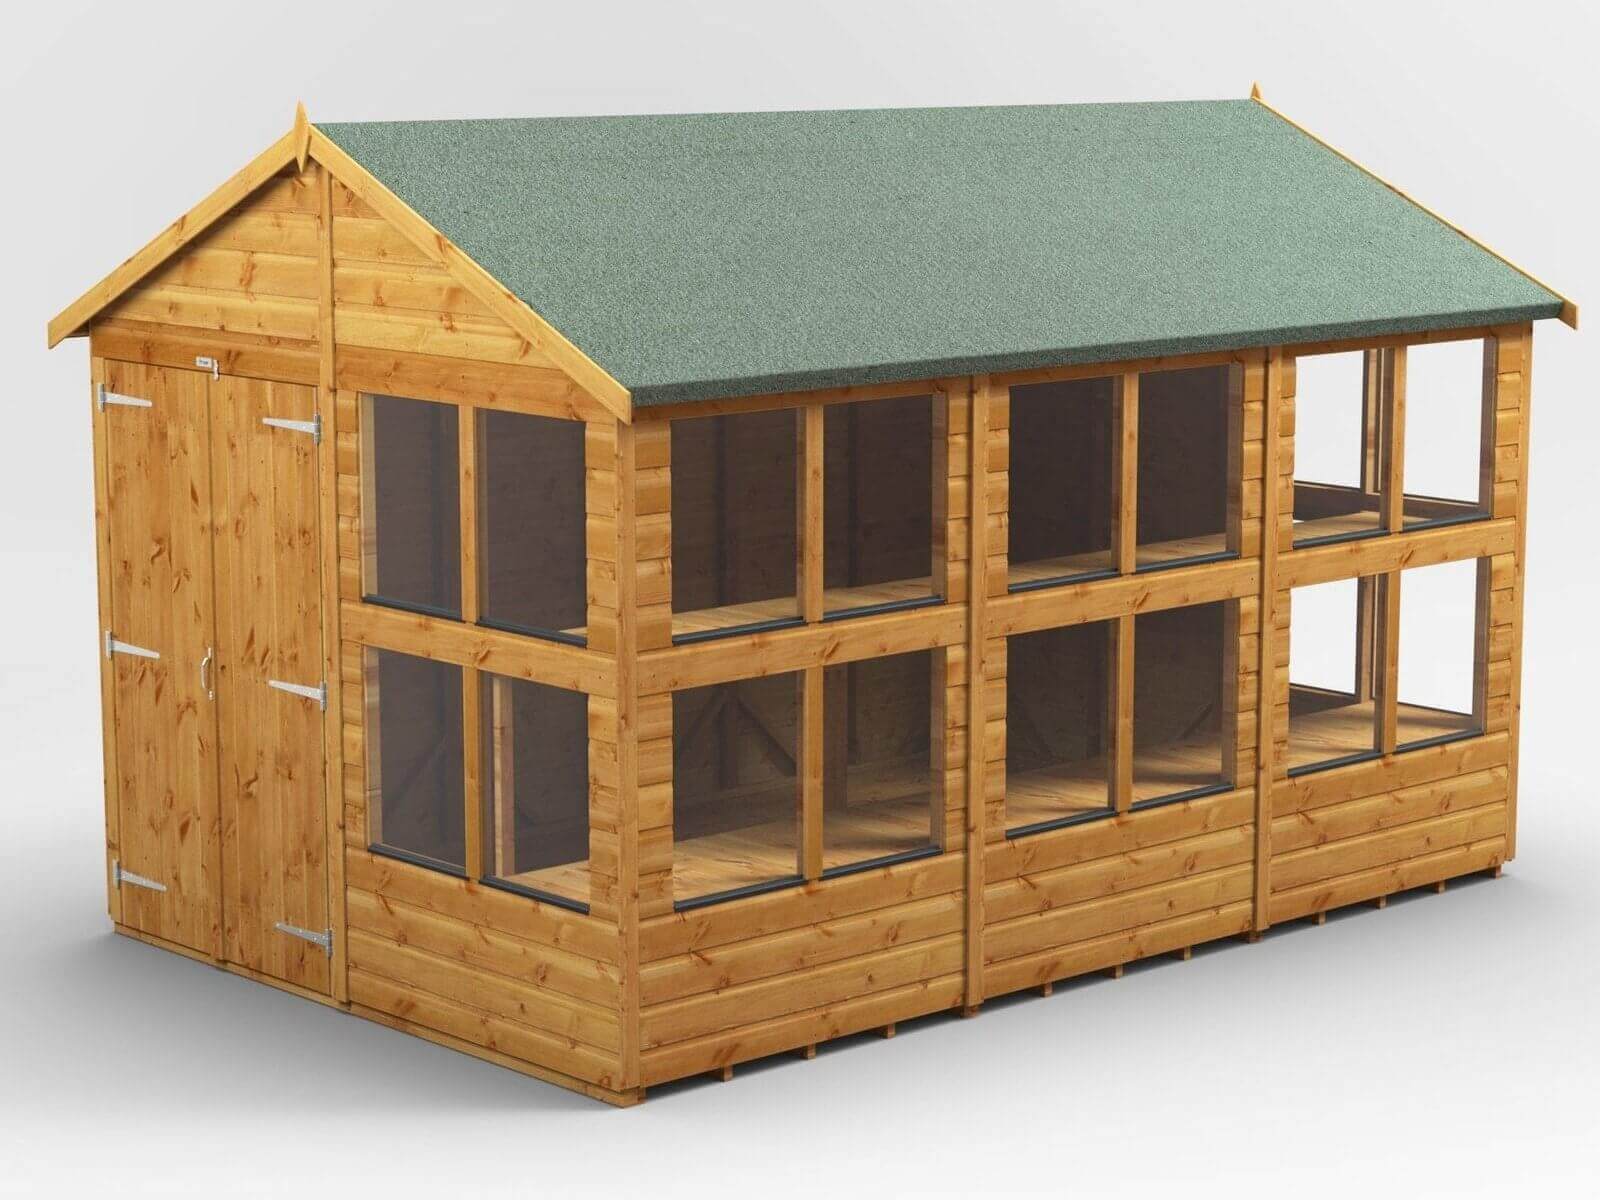 Power Apex Wooden Potting Shed Various Sizes Shed Sizes: Power Apex Potting Shed 12x8